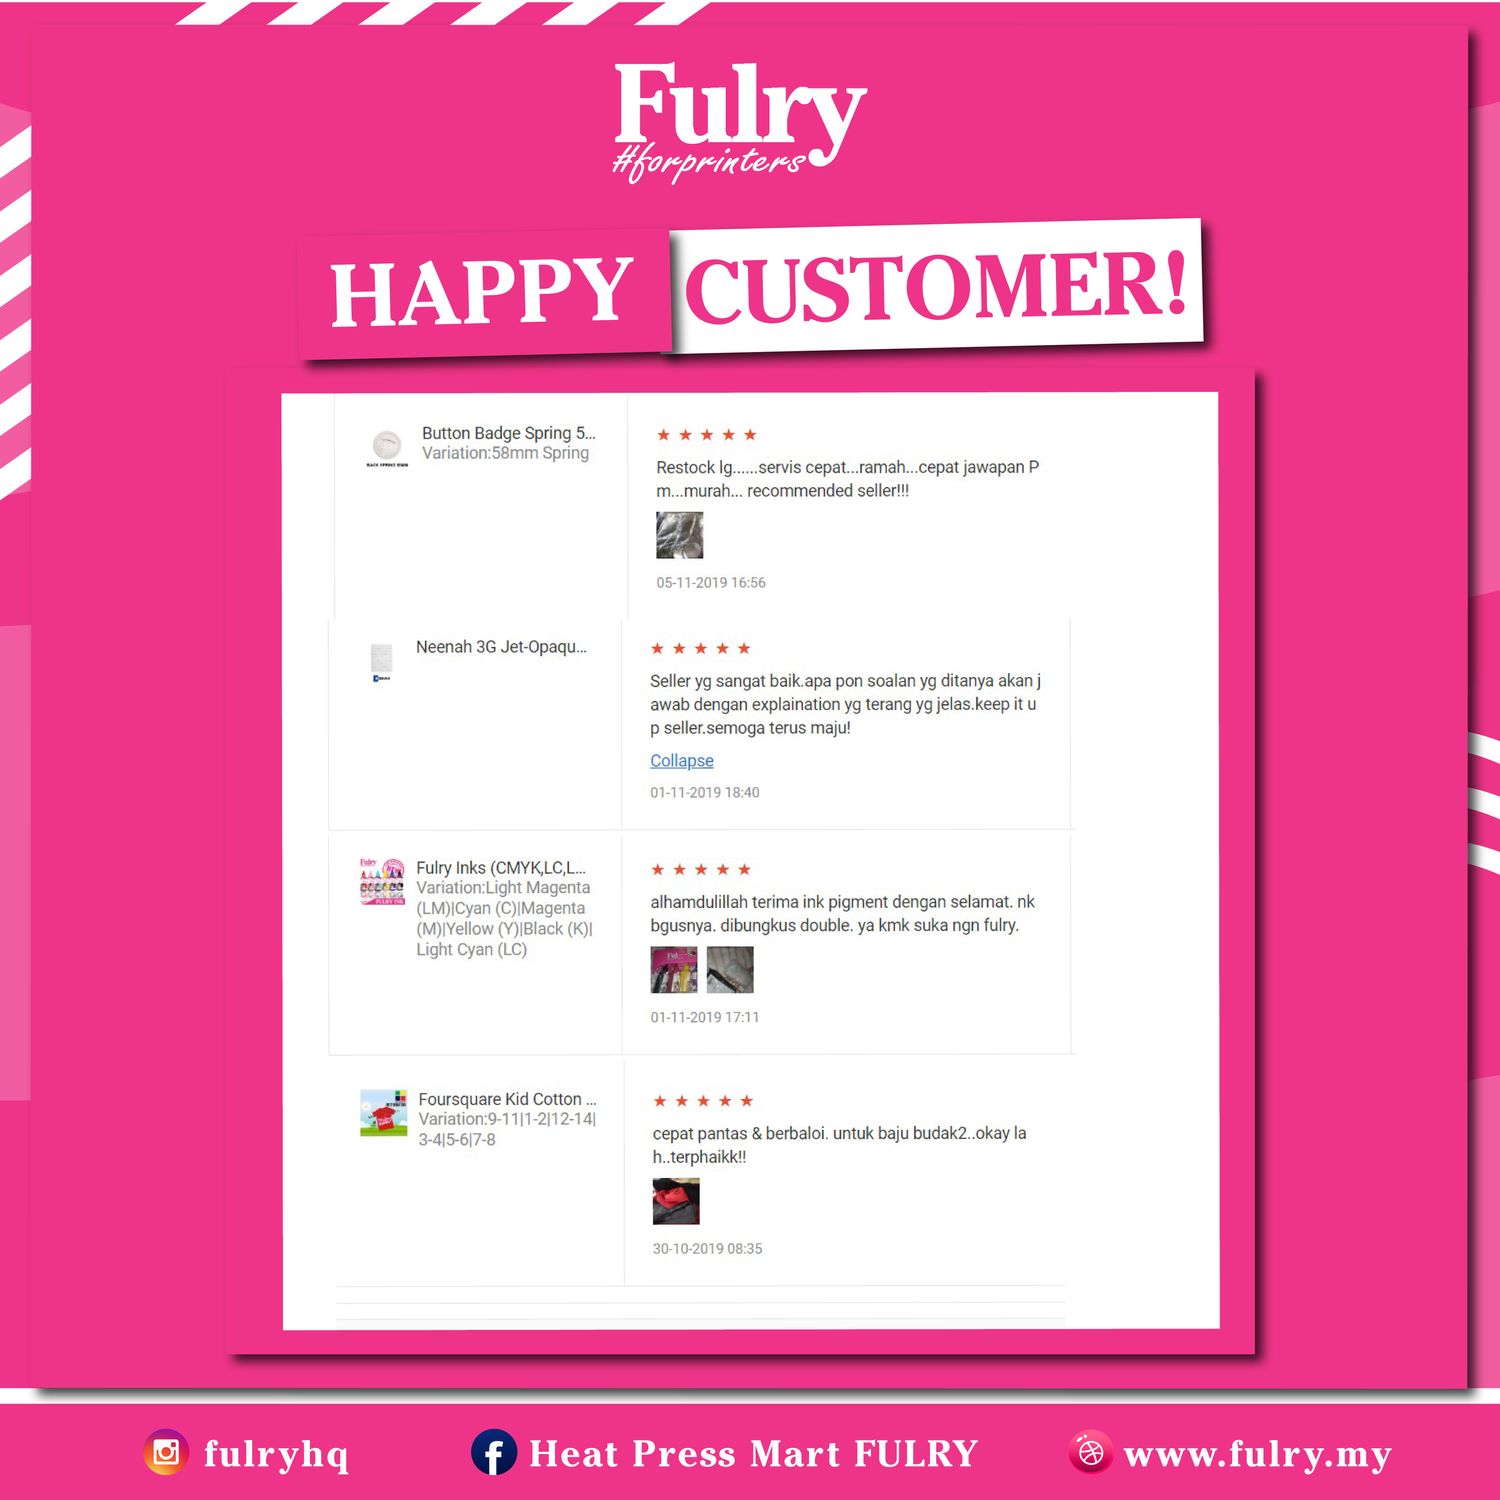 Heat Press Machine | Printing Materials Supplier Malaysia : Fulry - HONEST REVIEW!